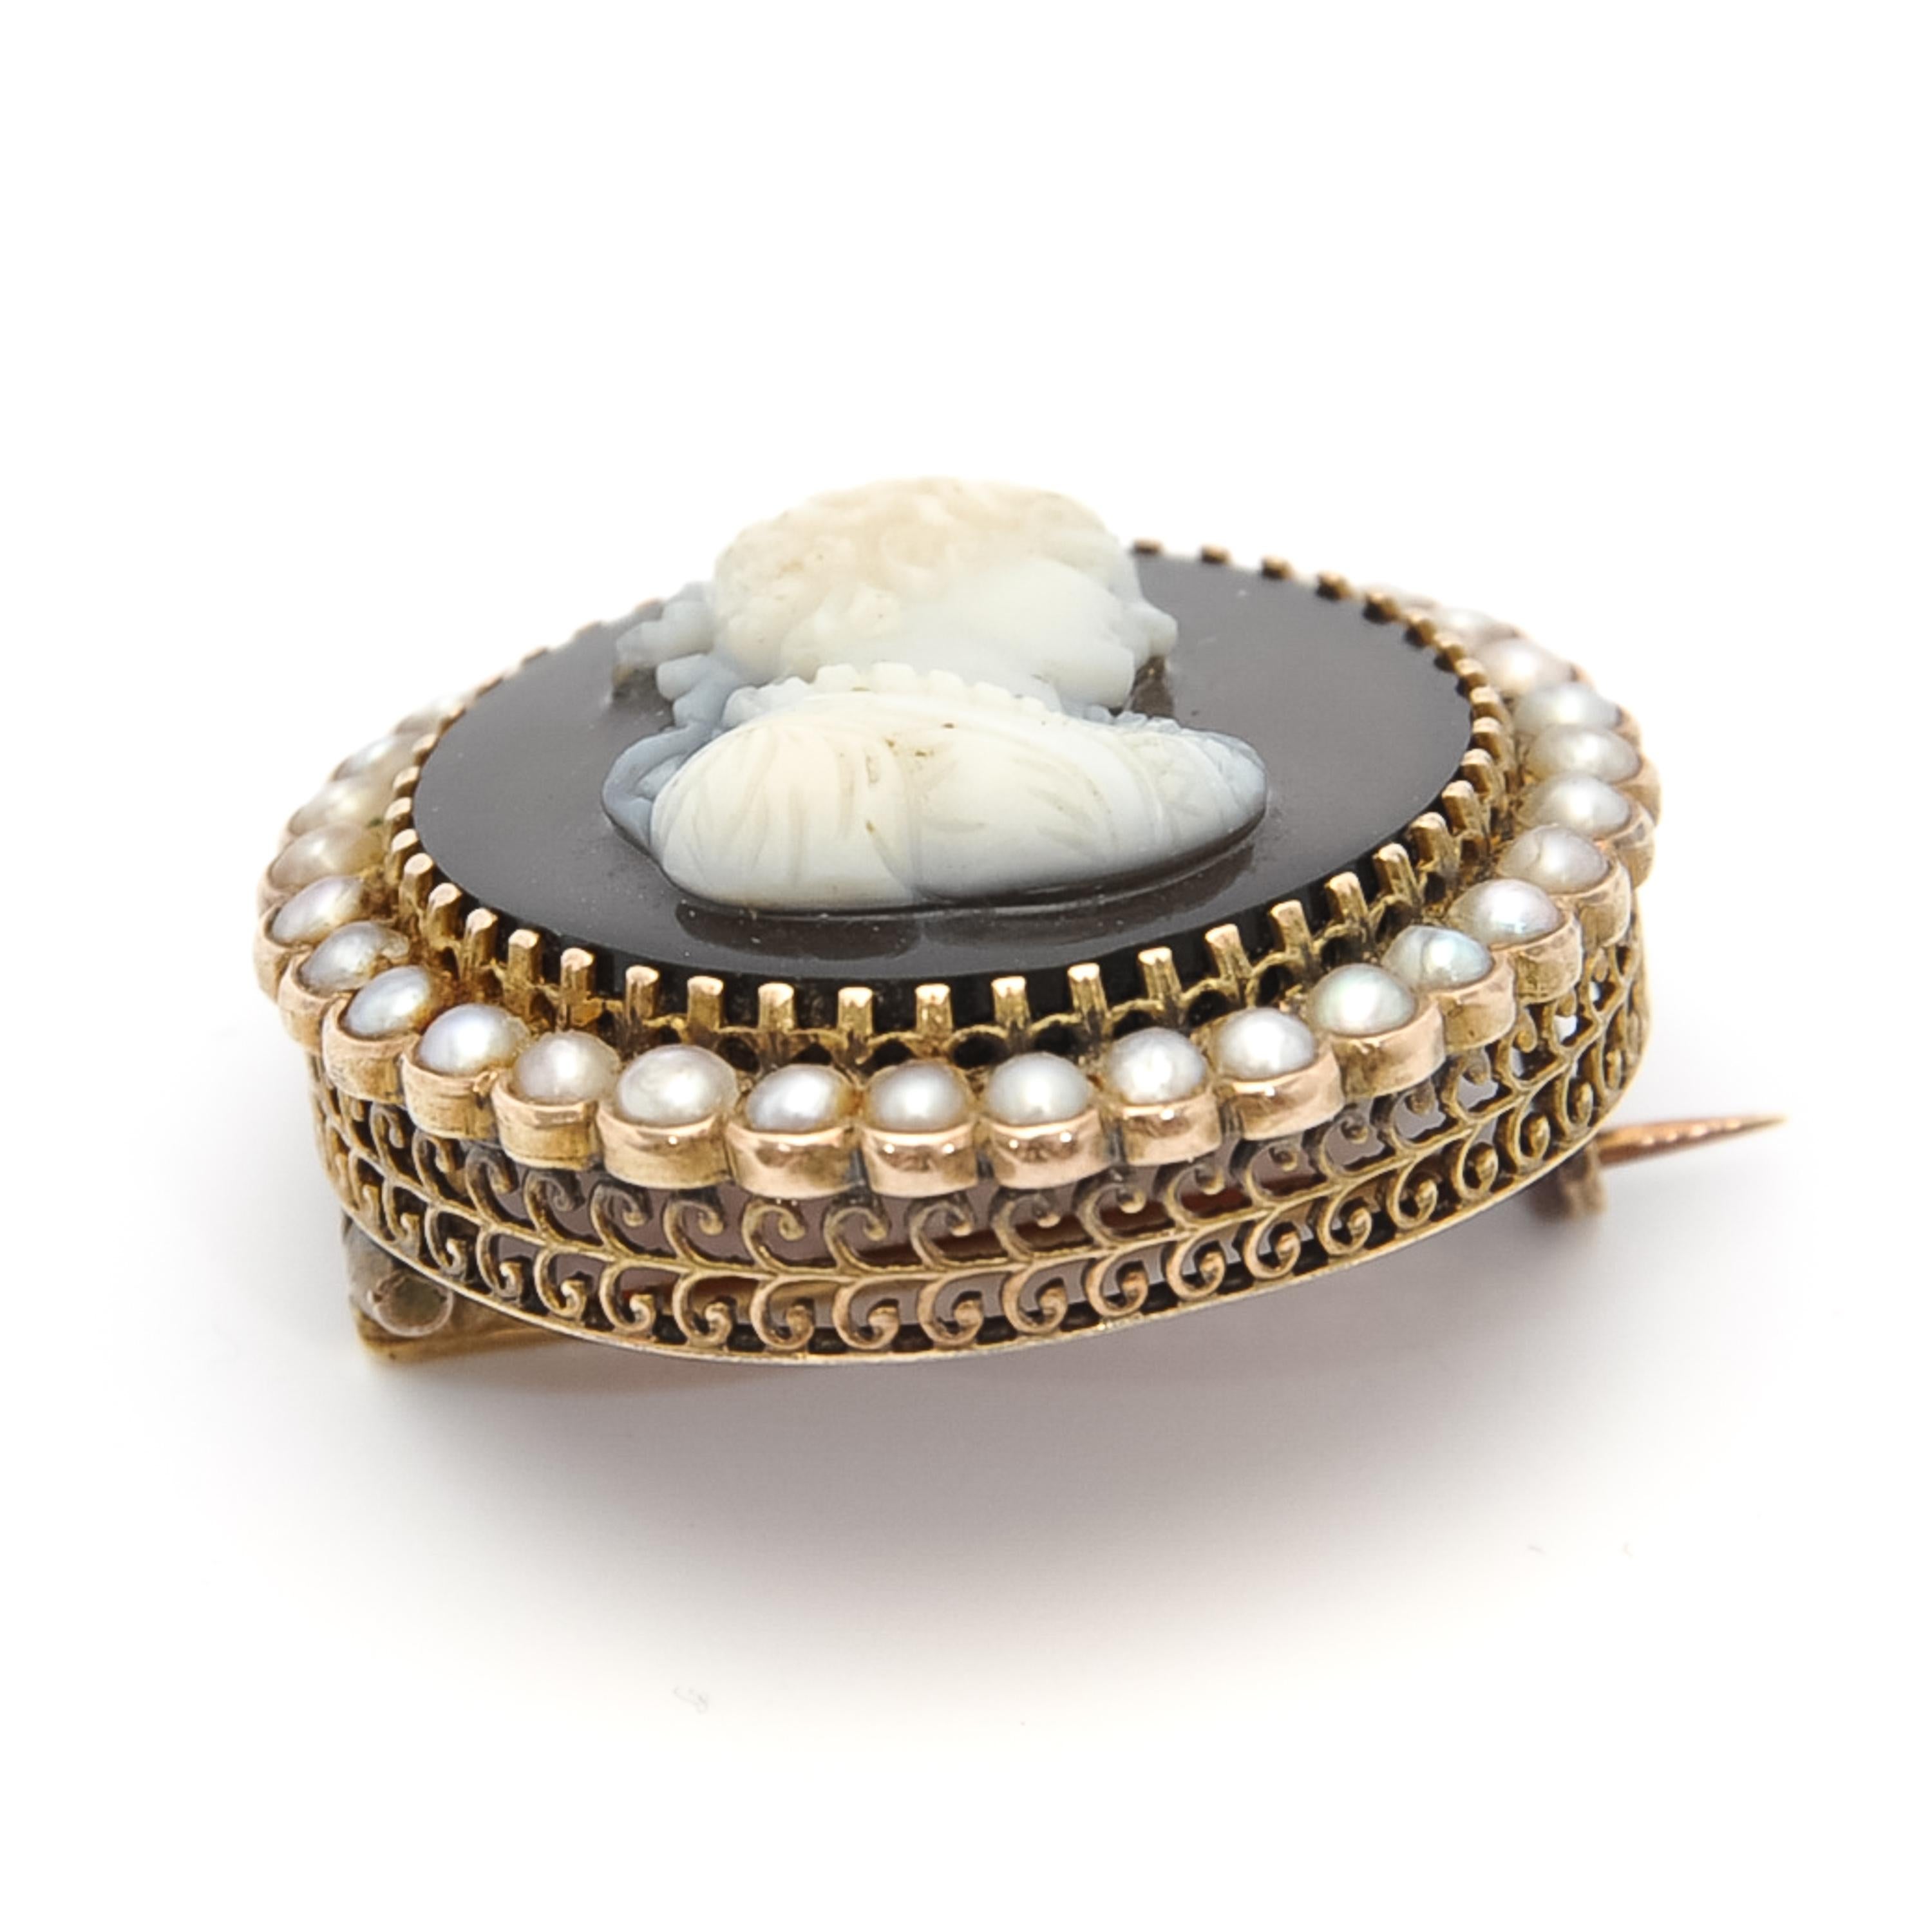 cameo brooch with pearls